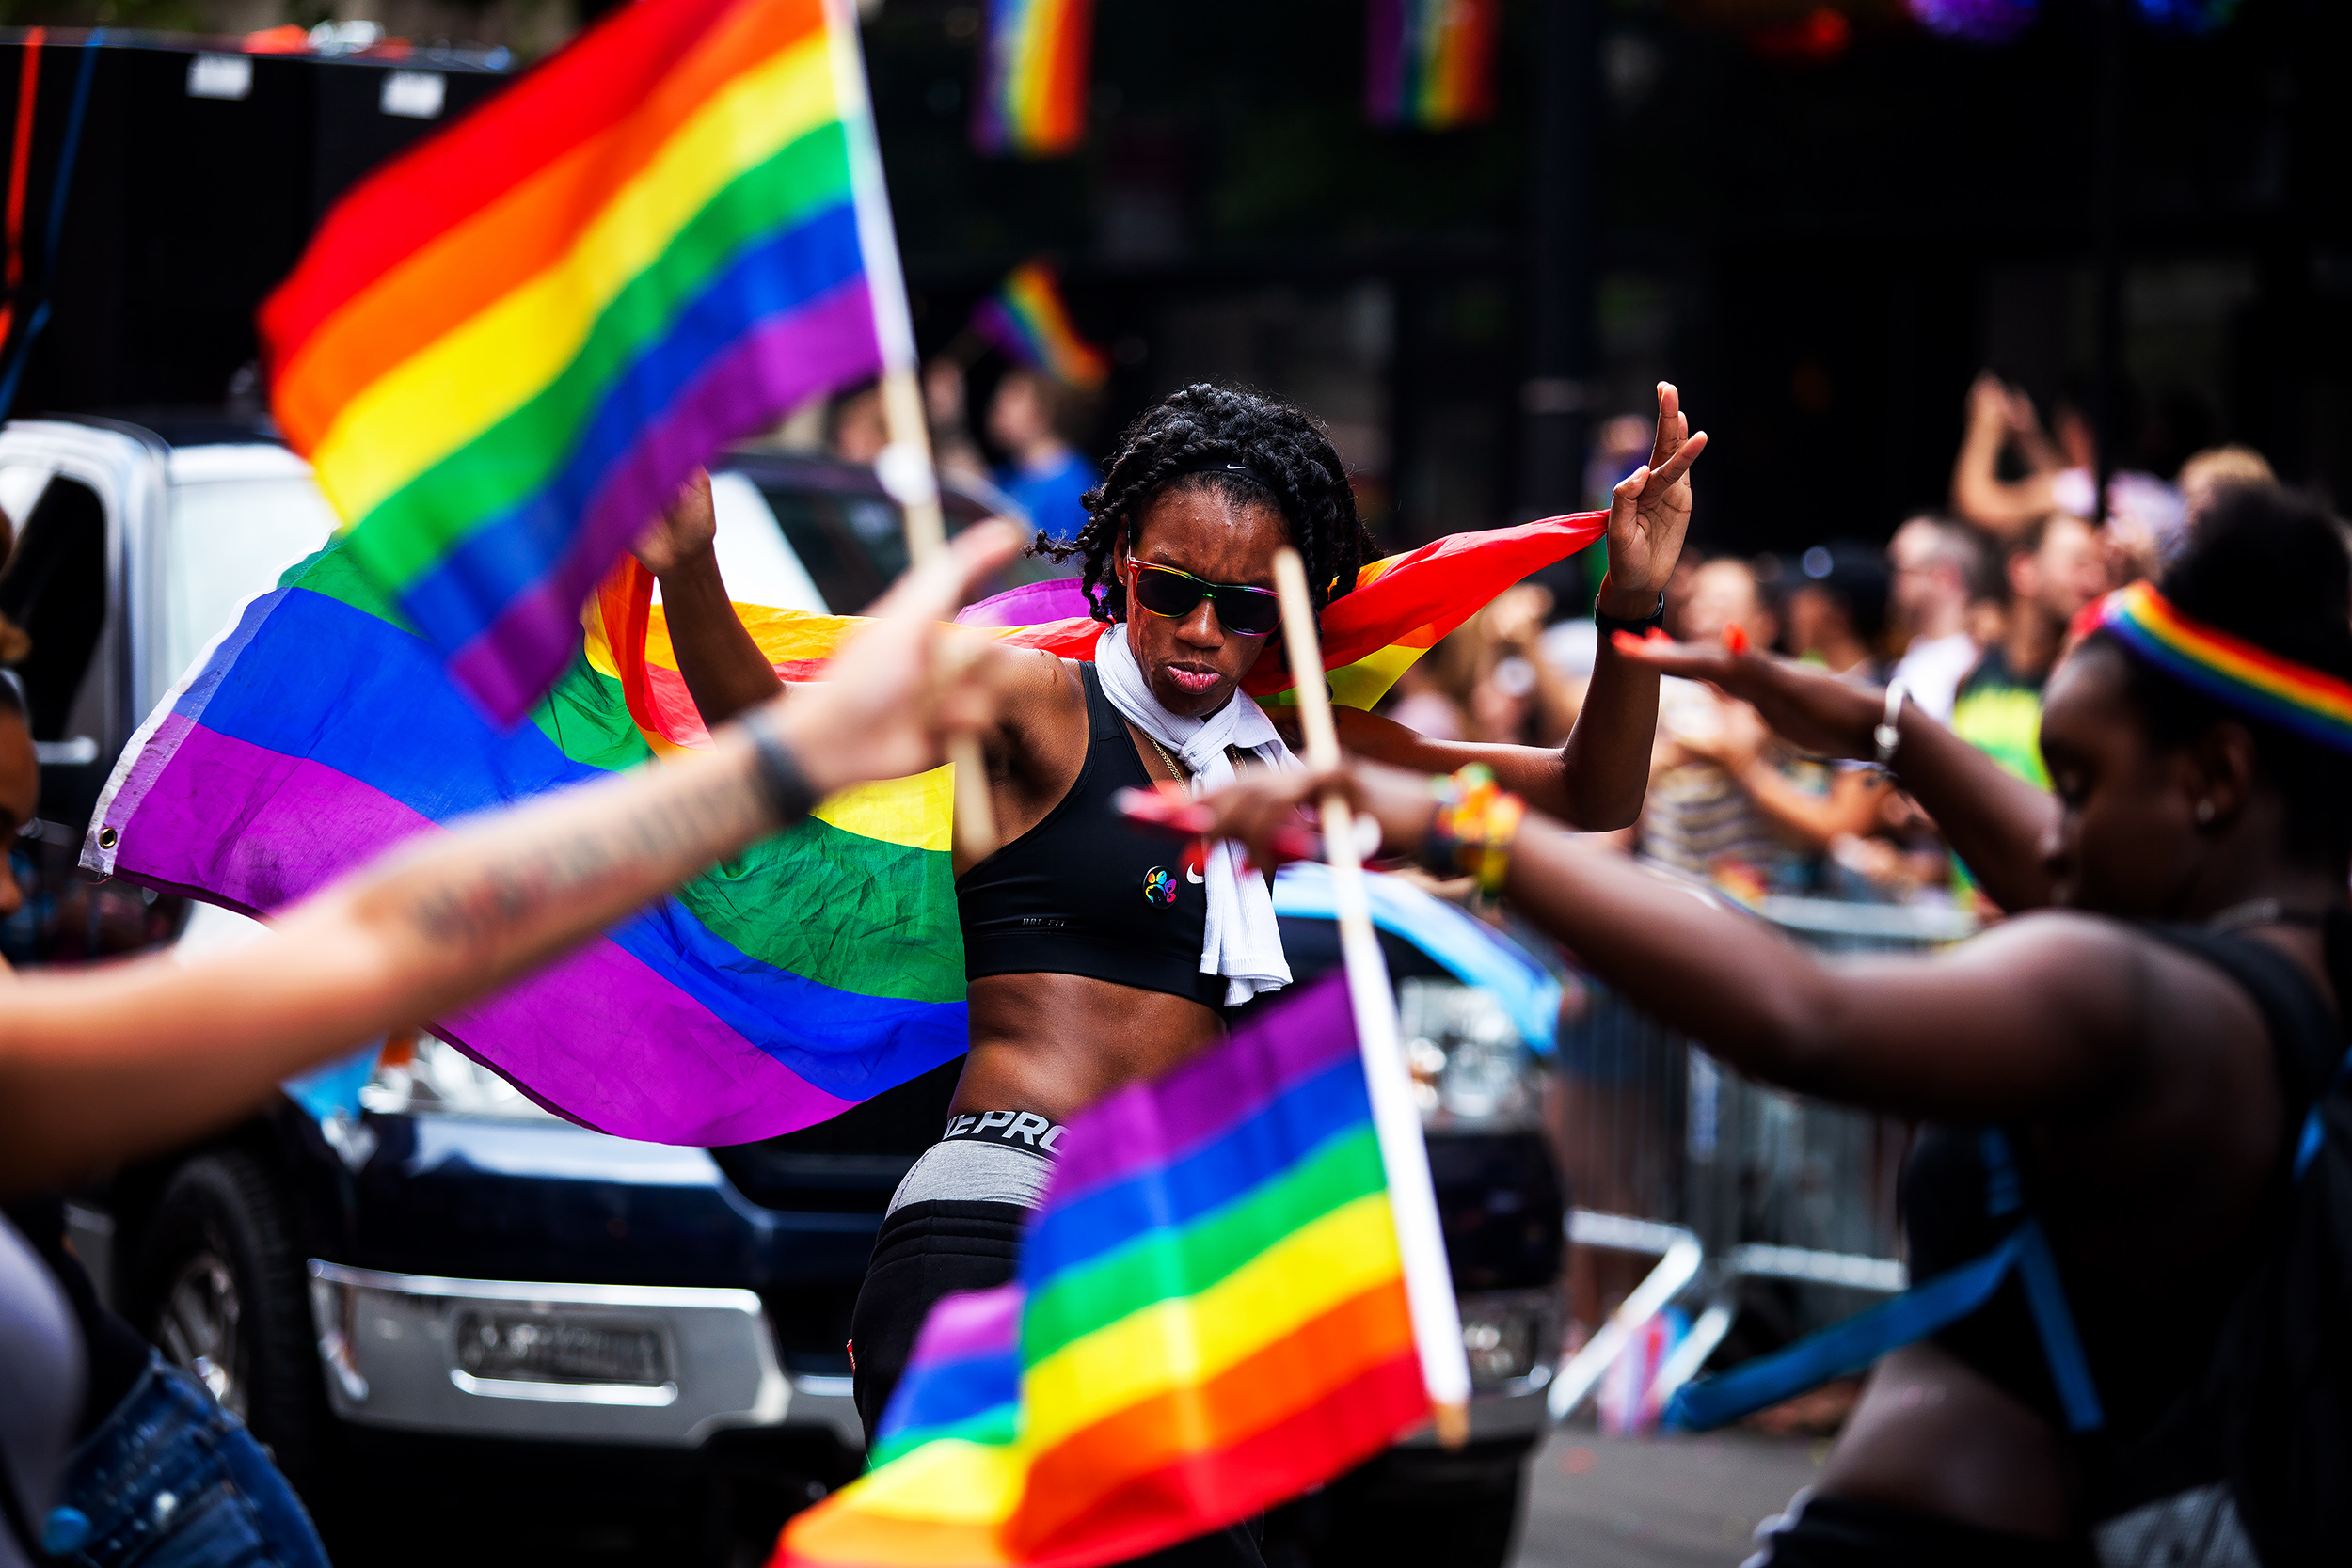  Thousands danced and marched in New York's 49th annual gay pride parade in Manhattan, New York June 24, 2018. The first Pride March in 1970 was a civil rights protest in defense of sexual freedom. Over the years, folks identifying as gay, lesbian, b